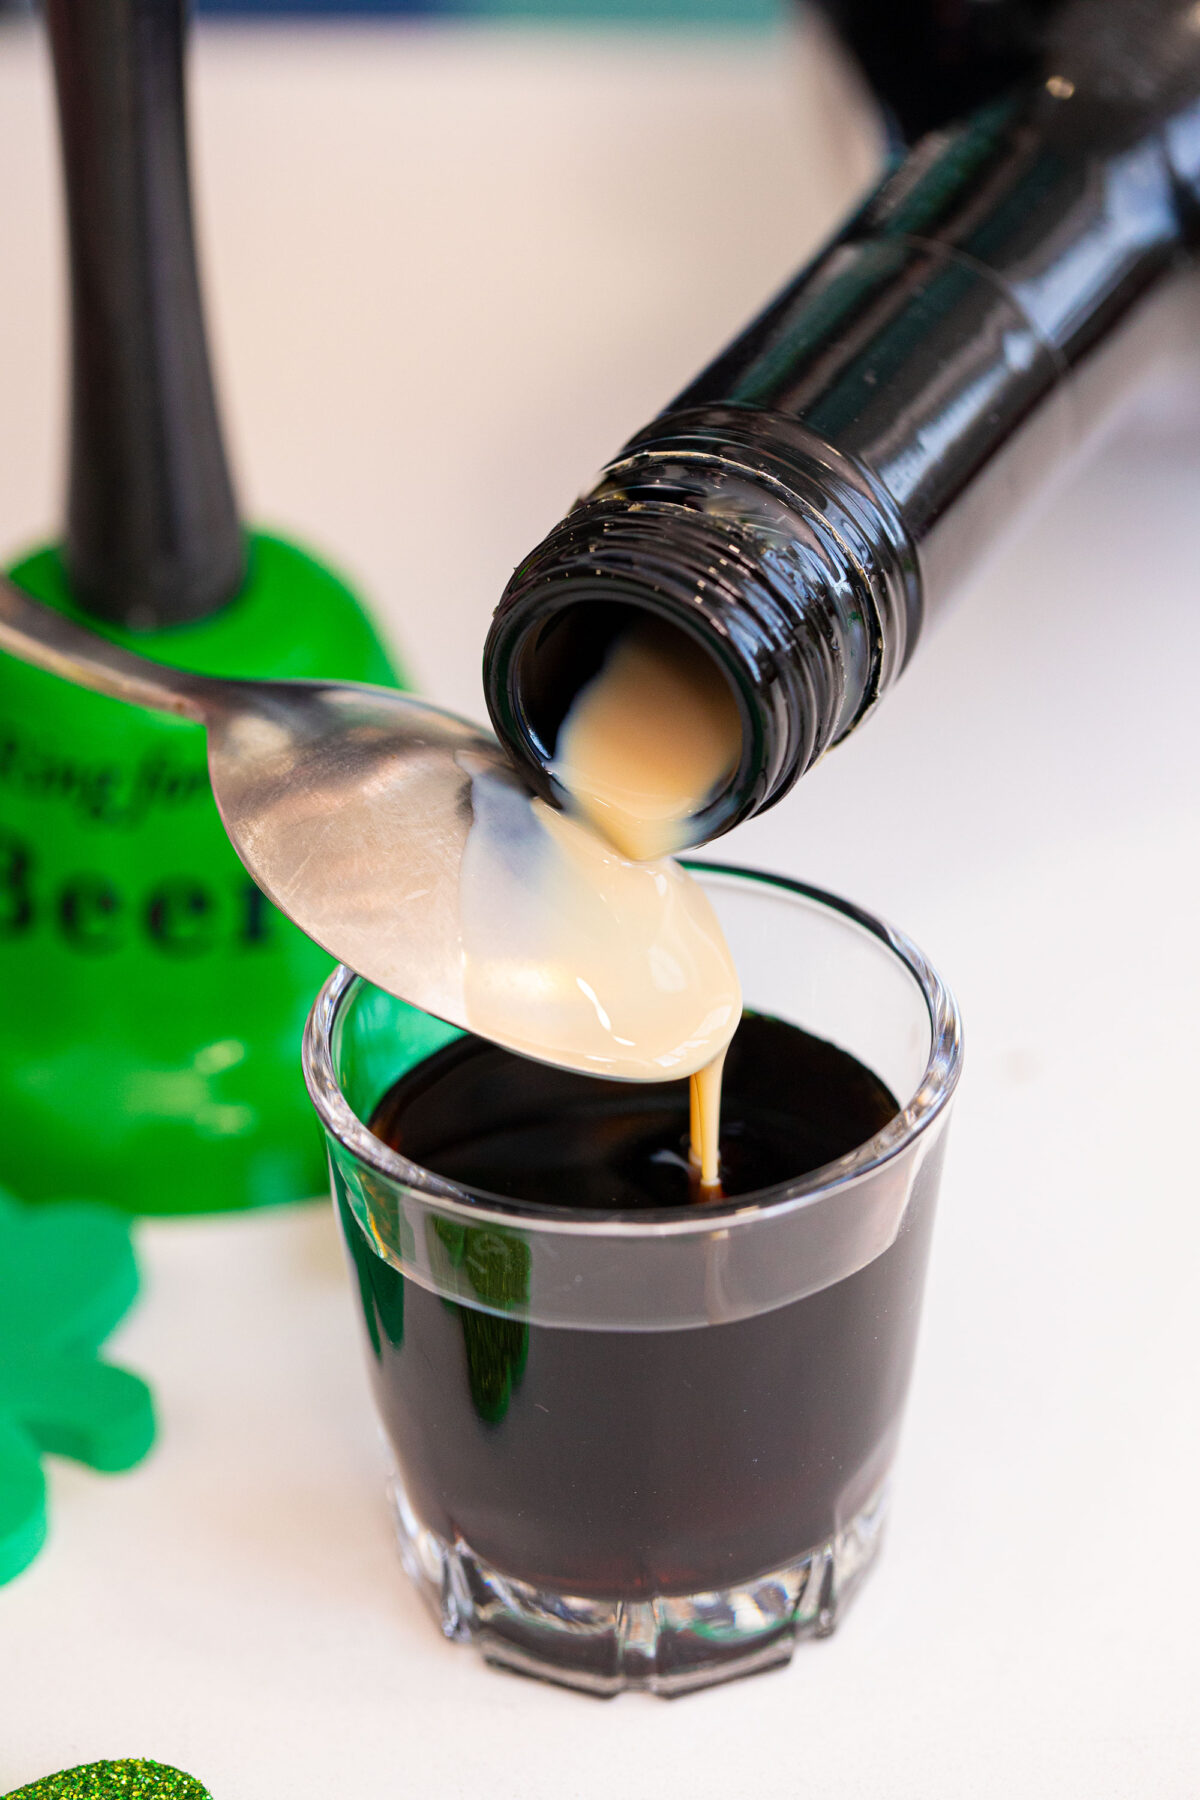 Pouring the Irish Cream over a spoon to create a floating layer.